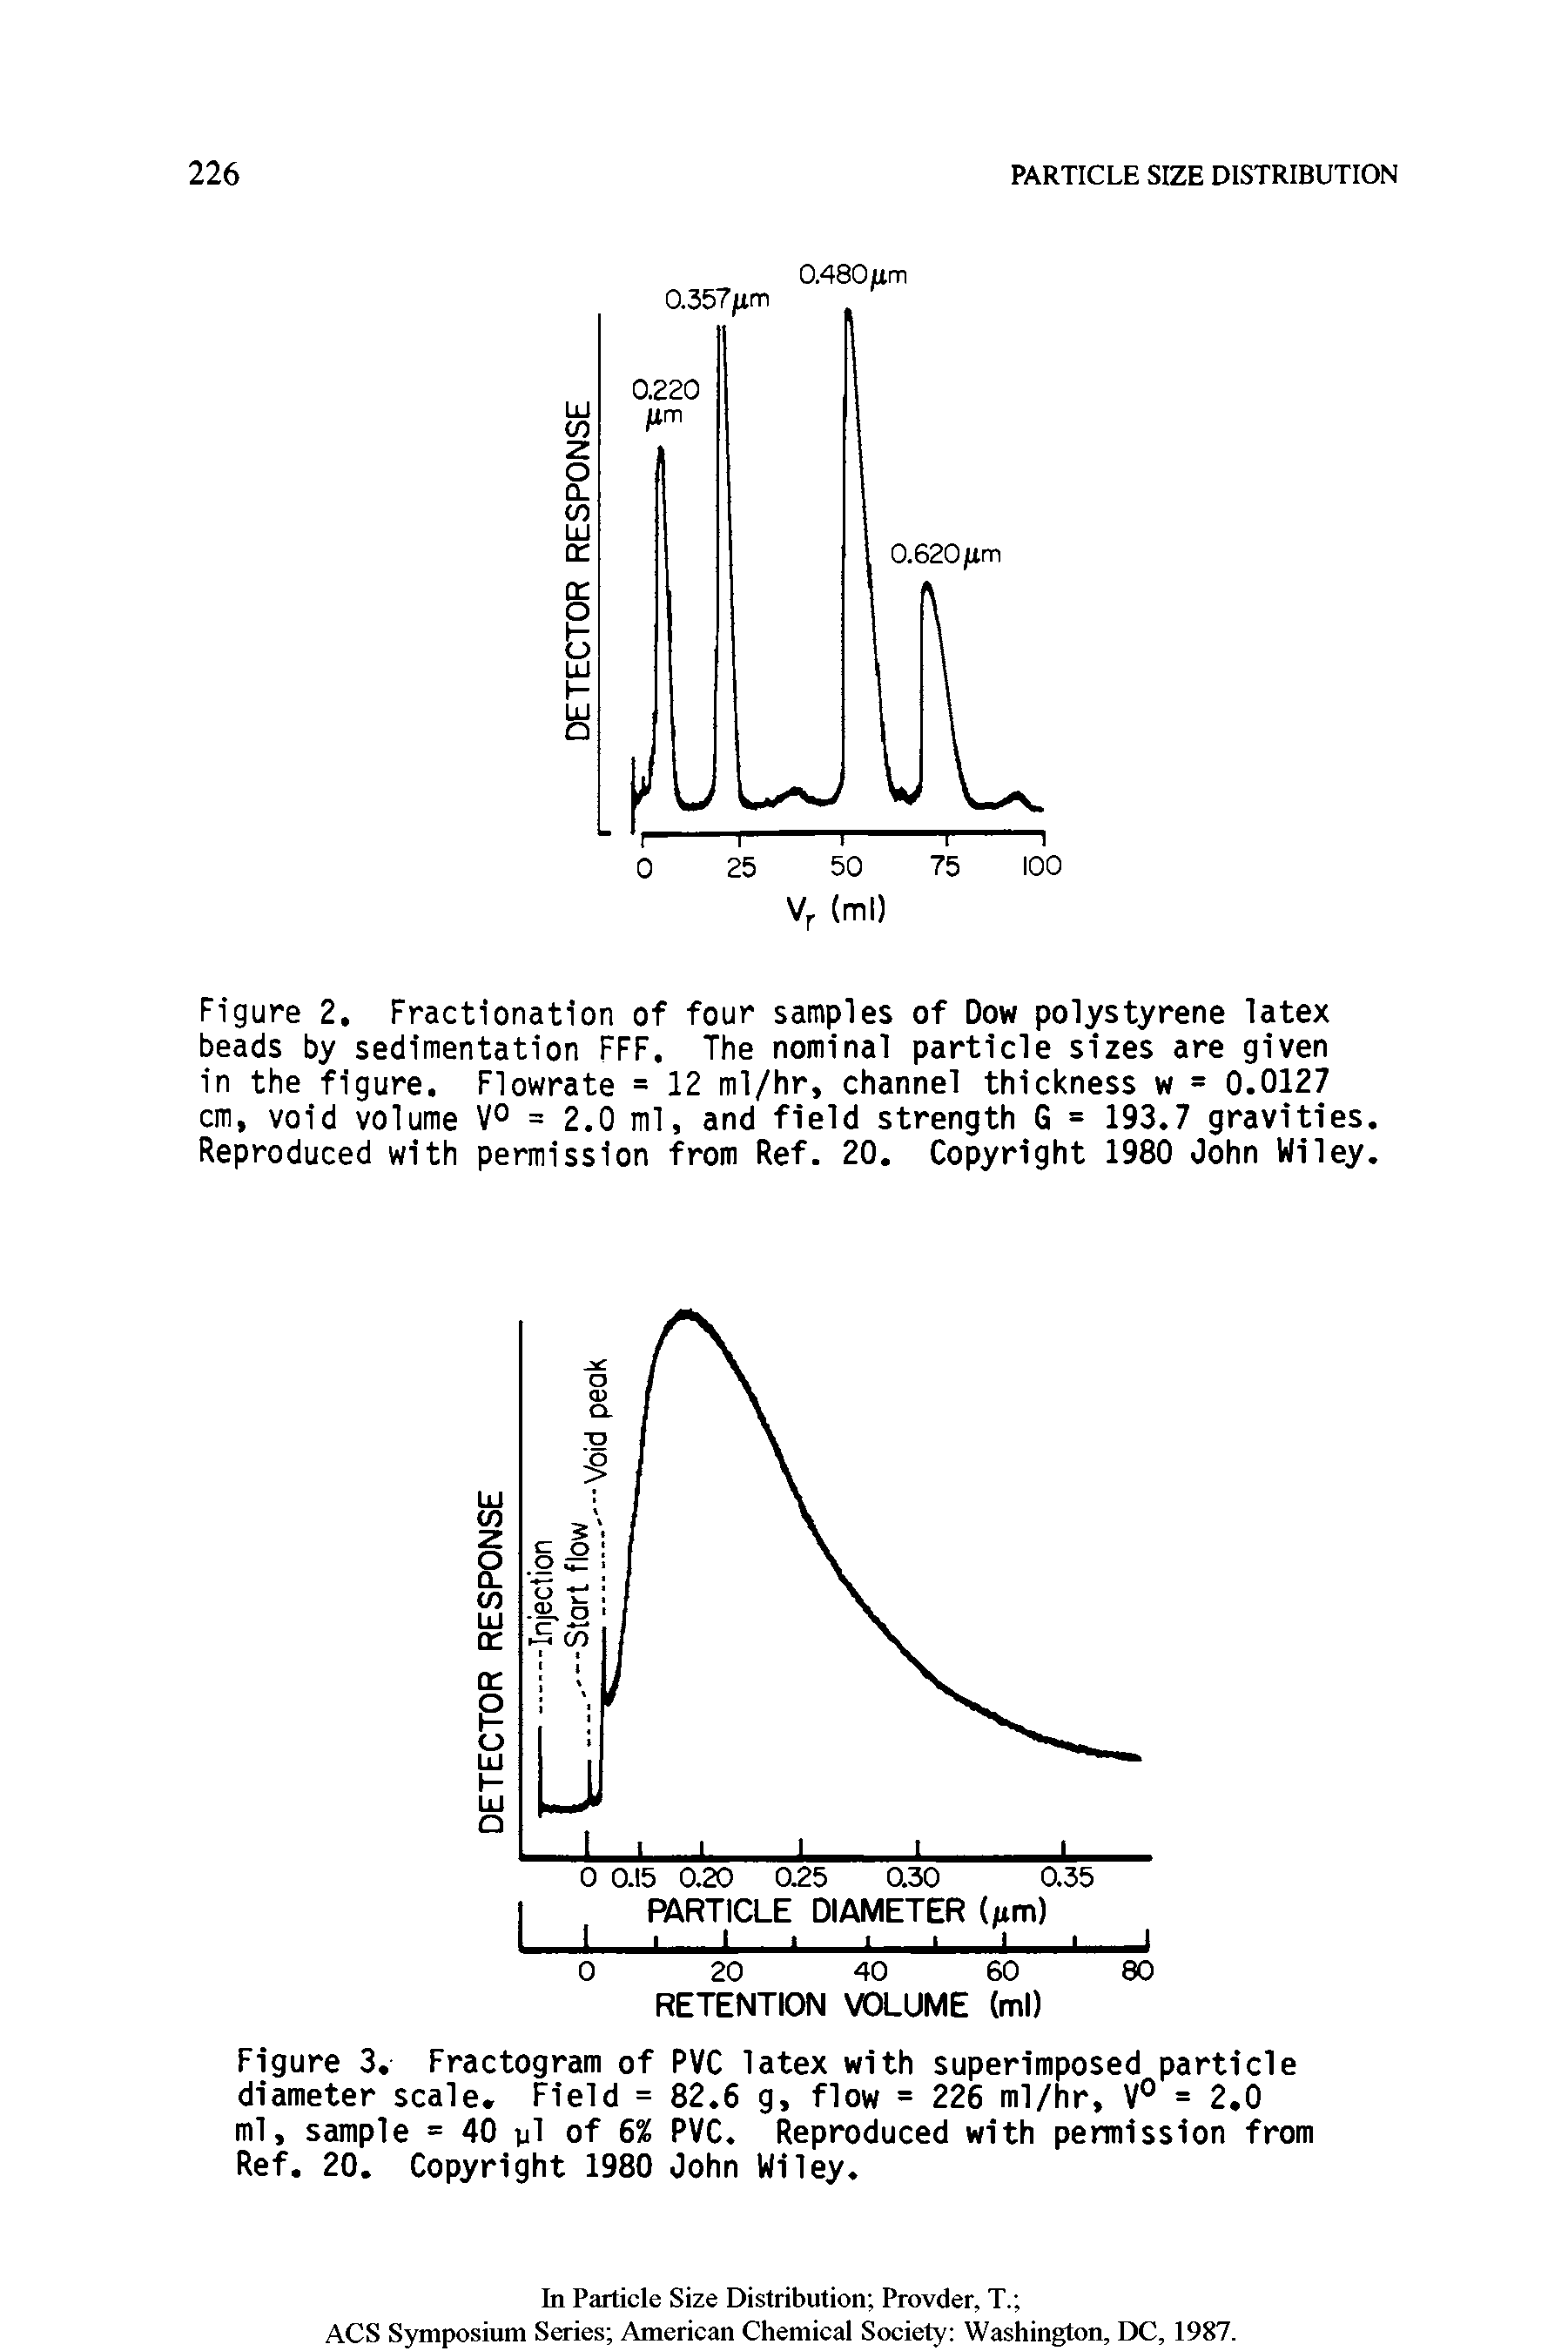 Figure 2. Fractionation of four samples of Dow polystyrene latex beads by sedimentation FFF. The nominal particle sizes are given in the figure. Flowrate = 12 ml/hr, channel thickness w = 0.0127 cm, void volume V° = 2.0 ml, and field strength G = 193.7 gravities. Reproduced with permission from Ref. 20. Copyright 1980 John Wiley.